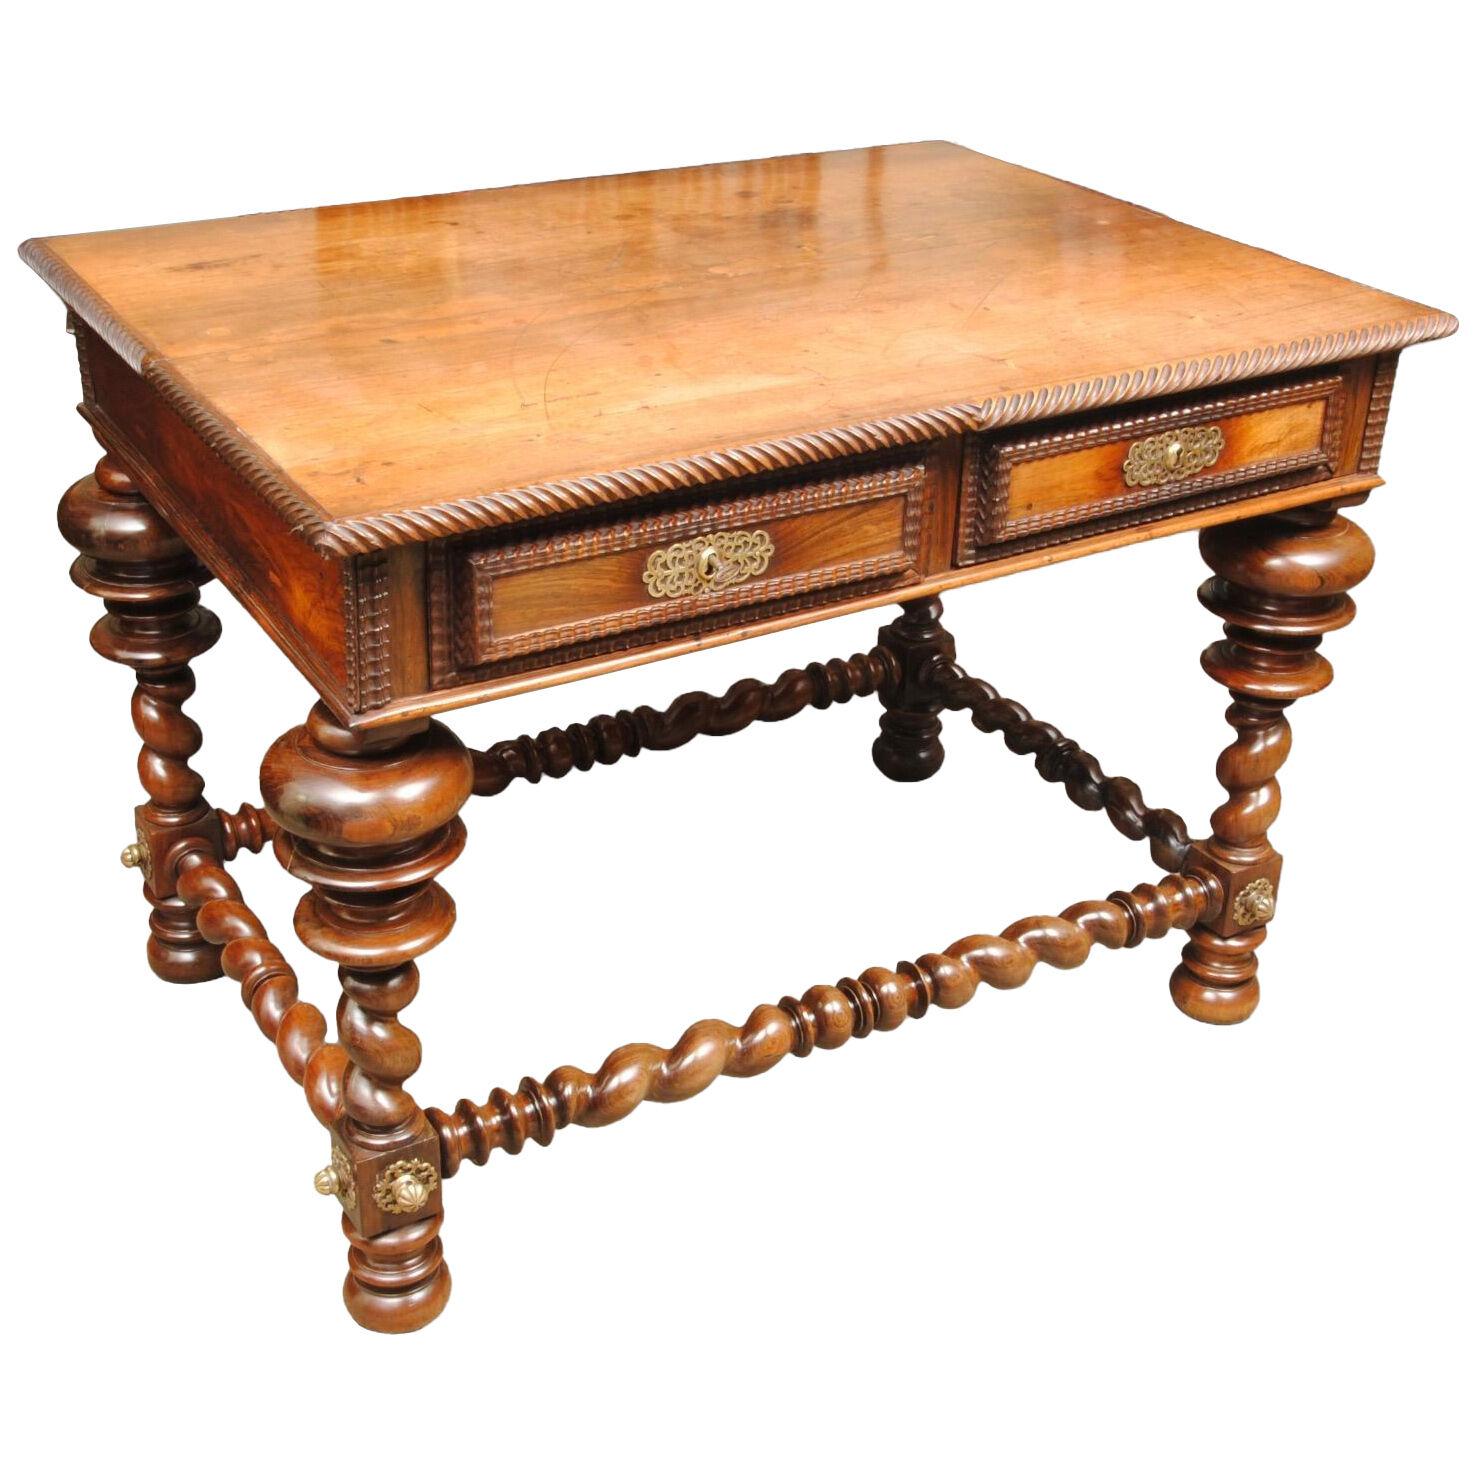 18TH CENTURY PORTUGUESE ROSEWOOD TABLE